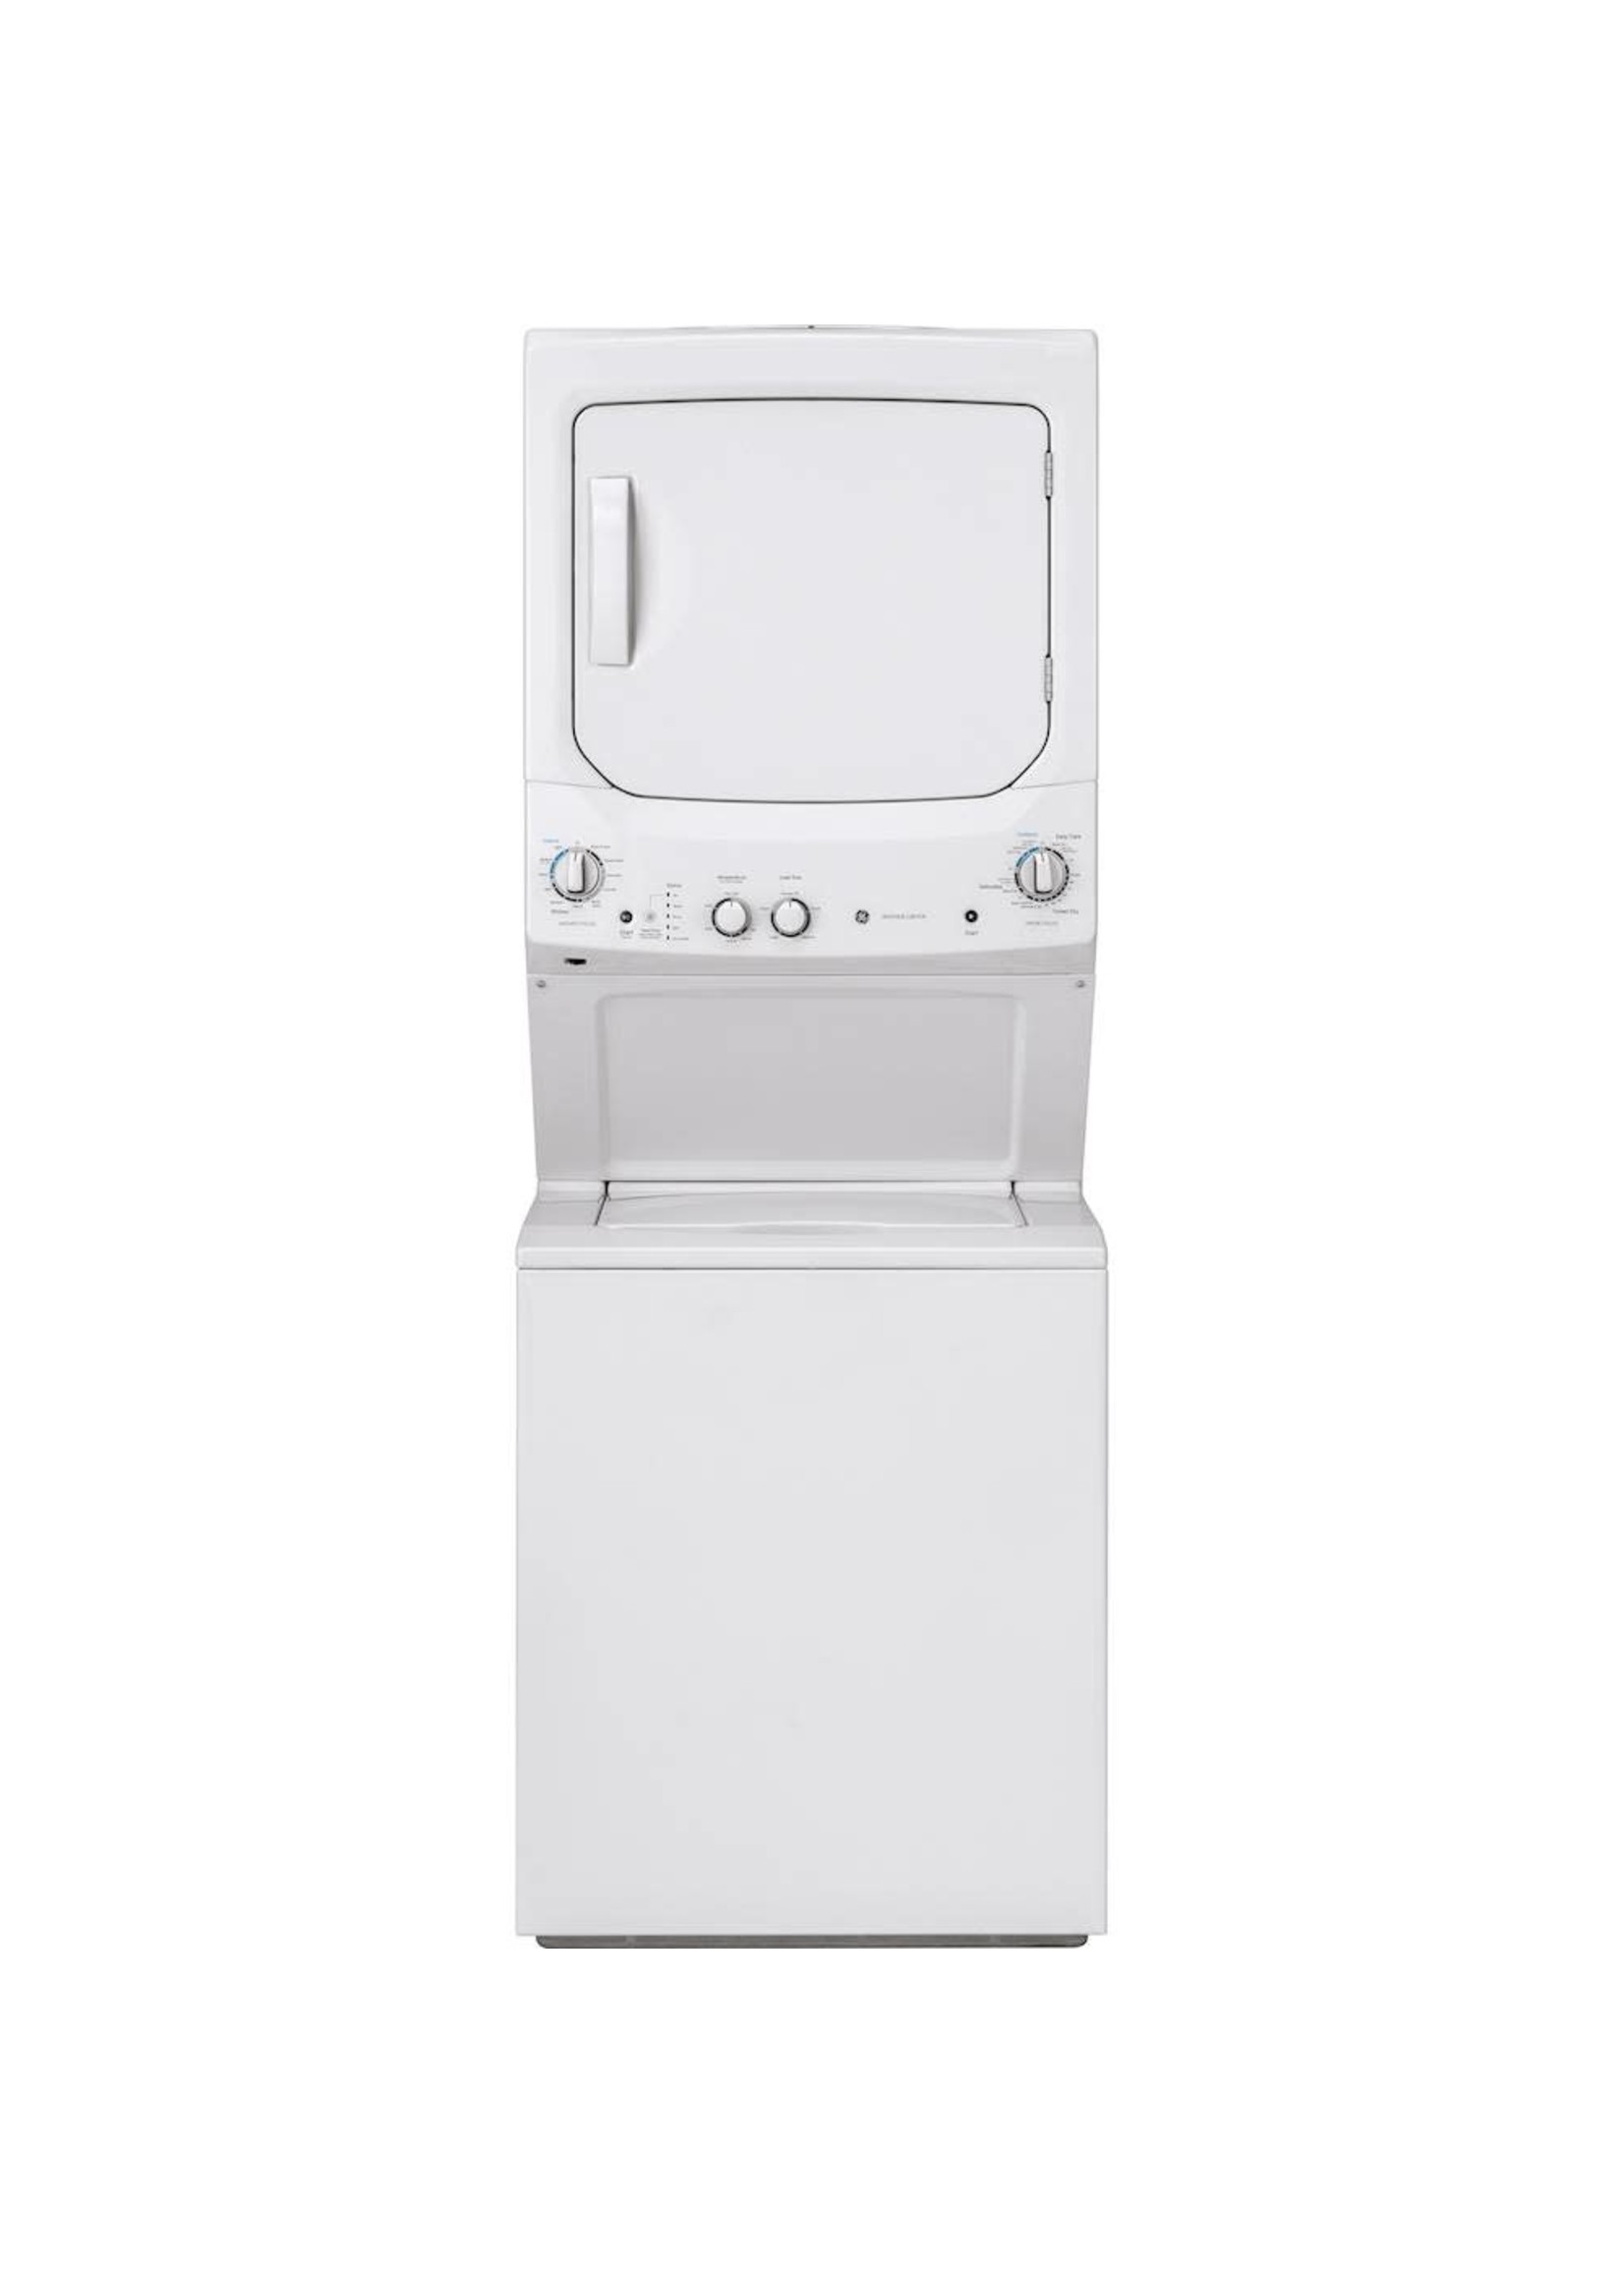 GE 27 Inch Electric Laundry Center